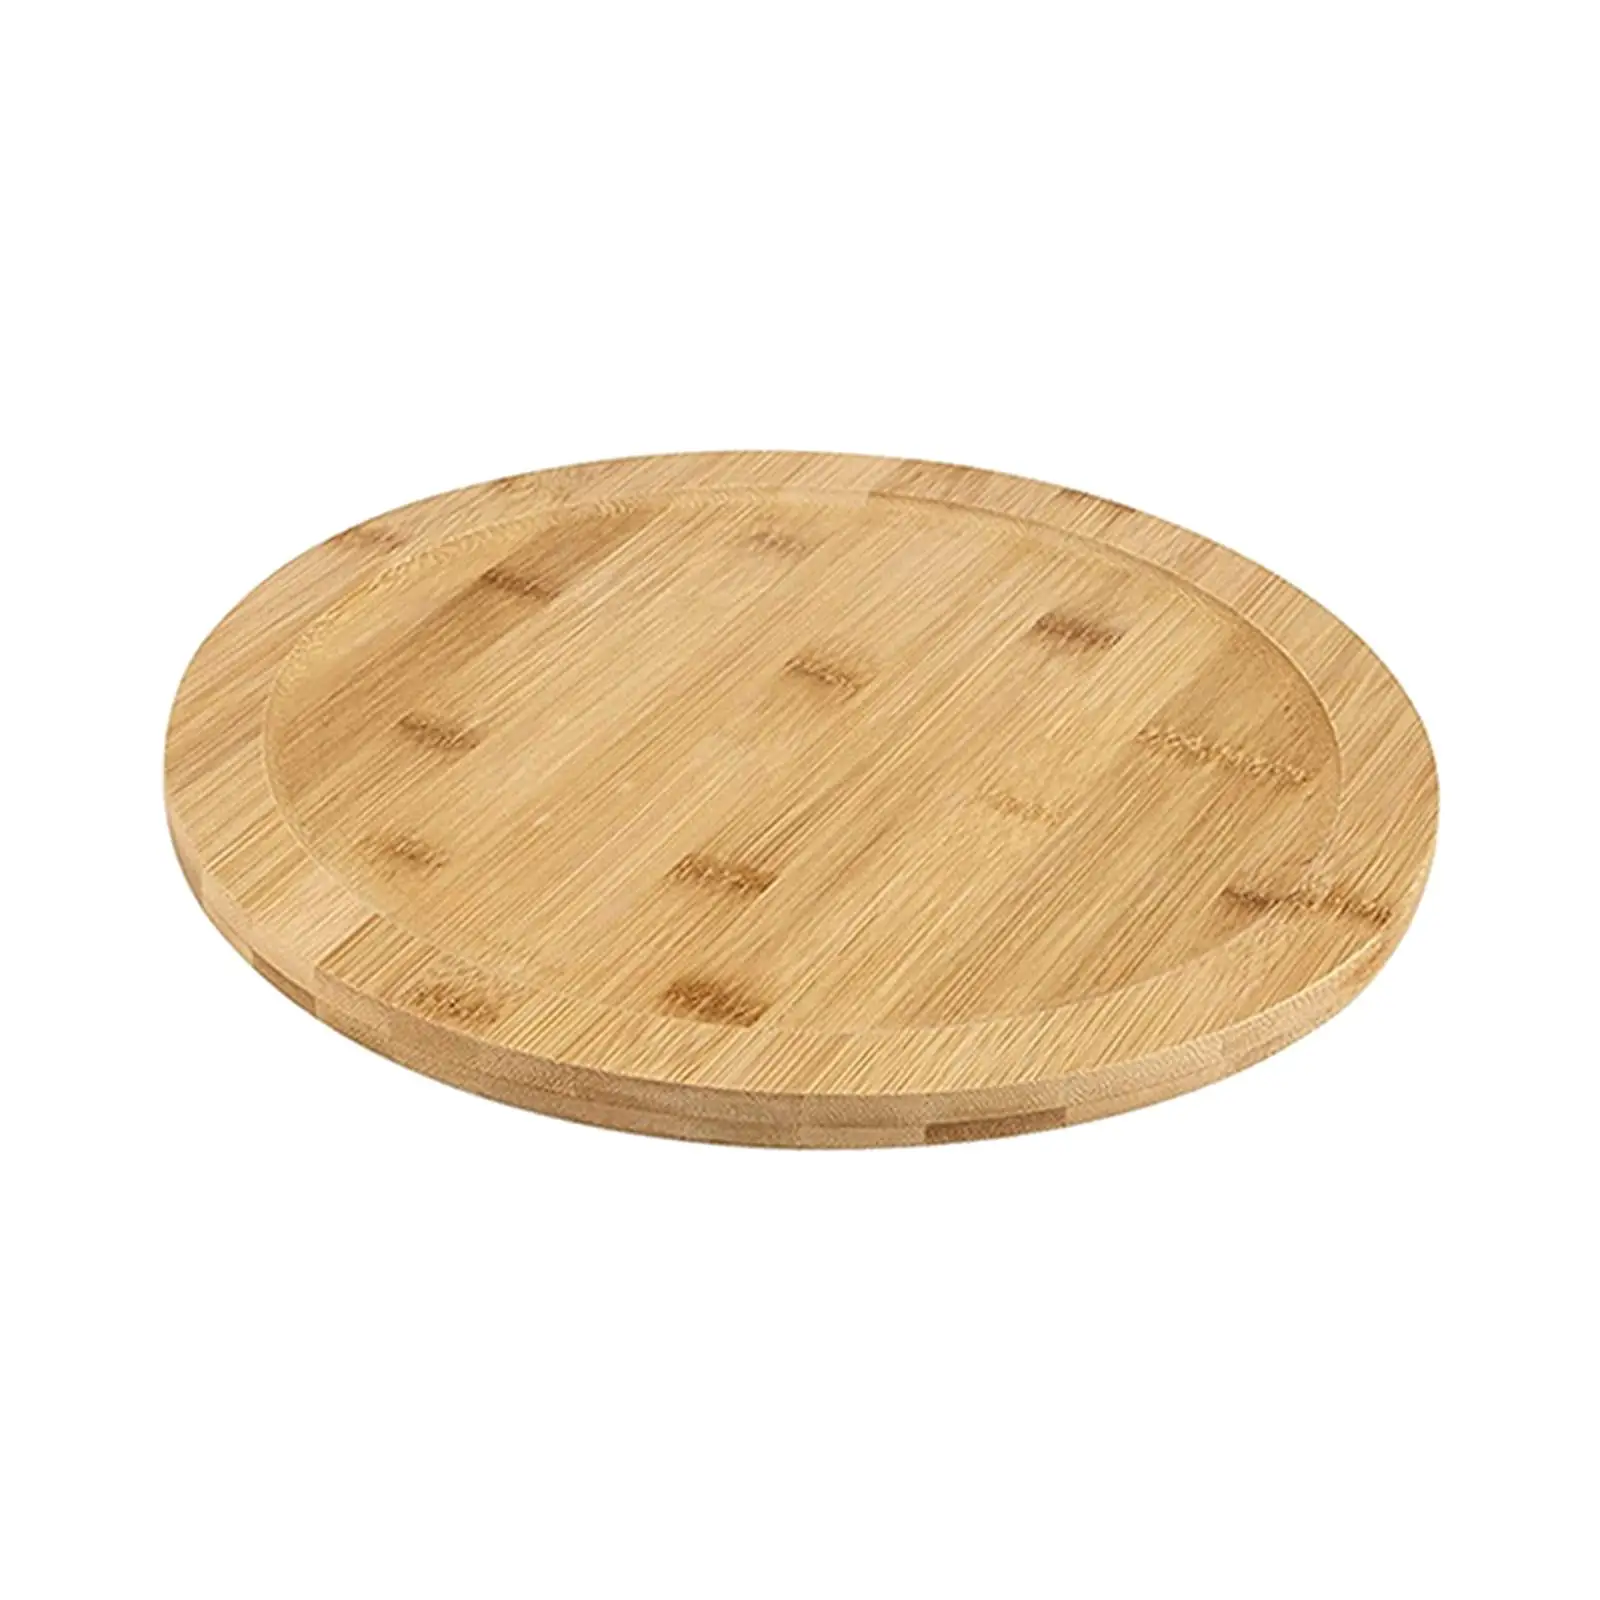 Wooden Turntable Rotating Board Wooden Rotating Dining Plate Rotating Base for Home Pantry Kitchen Countertop Dining Table